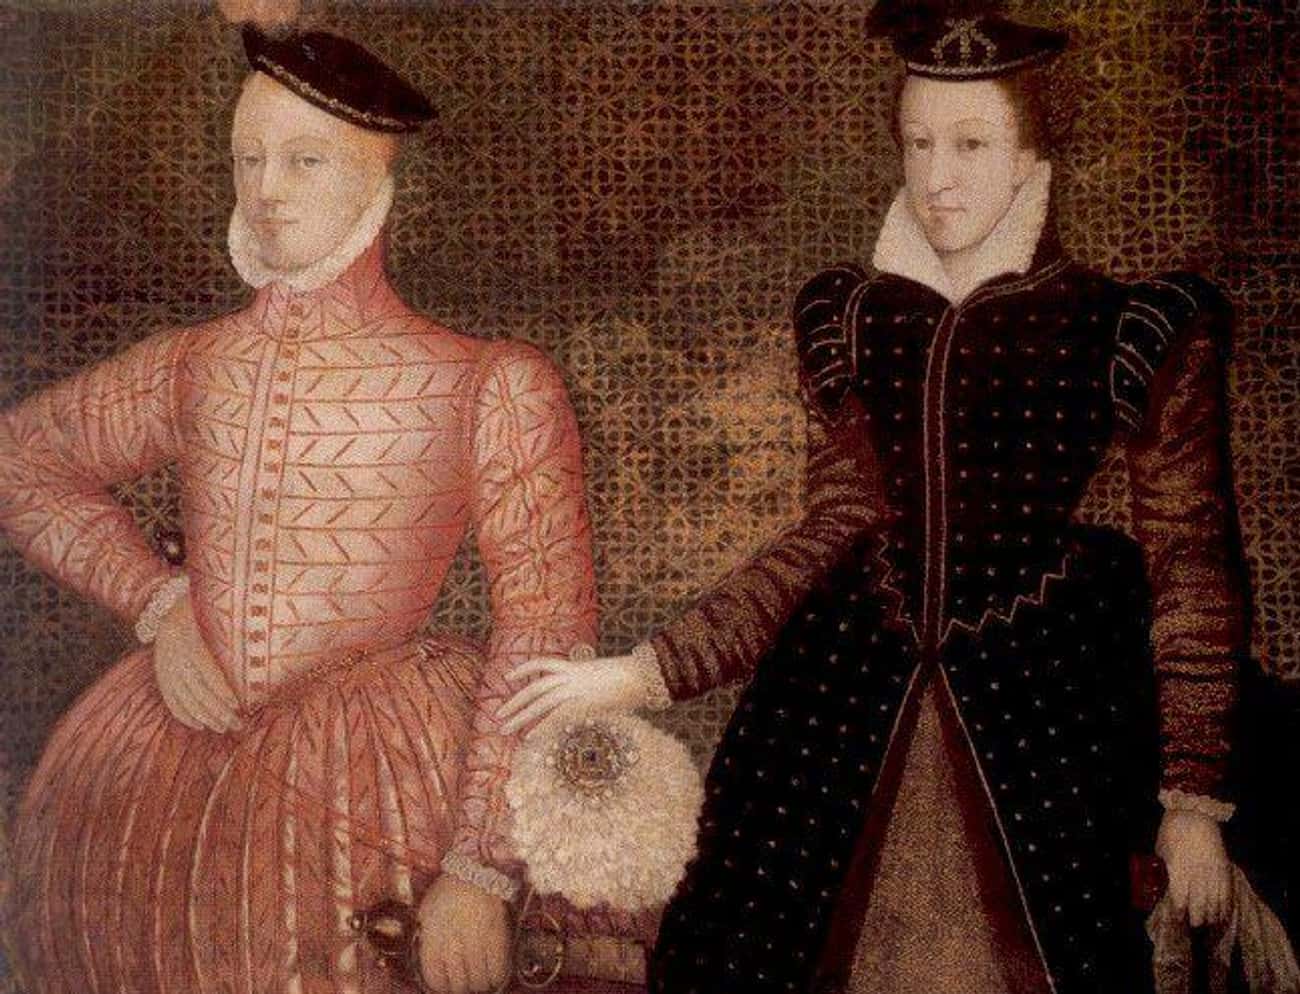 Mary Ignored Elizabeth’s Warnings About The Toxic Earl Of Bothwell